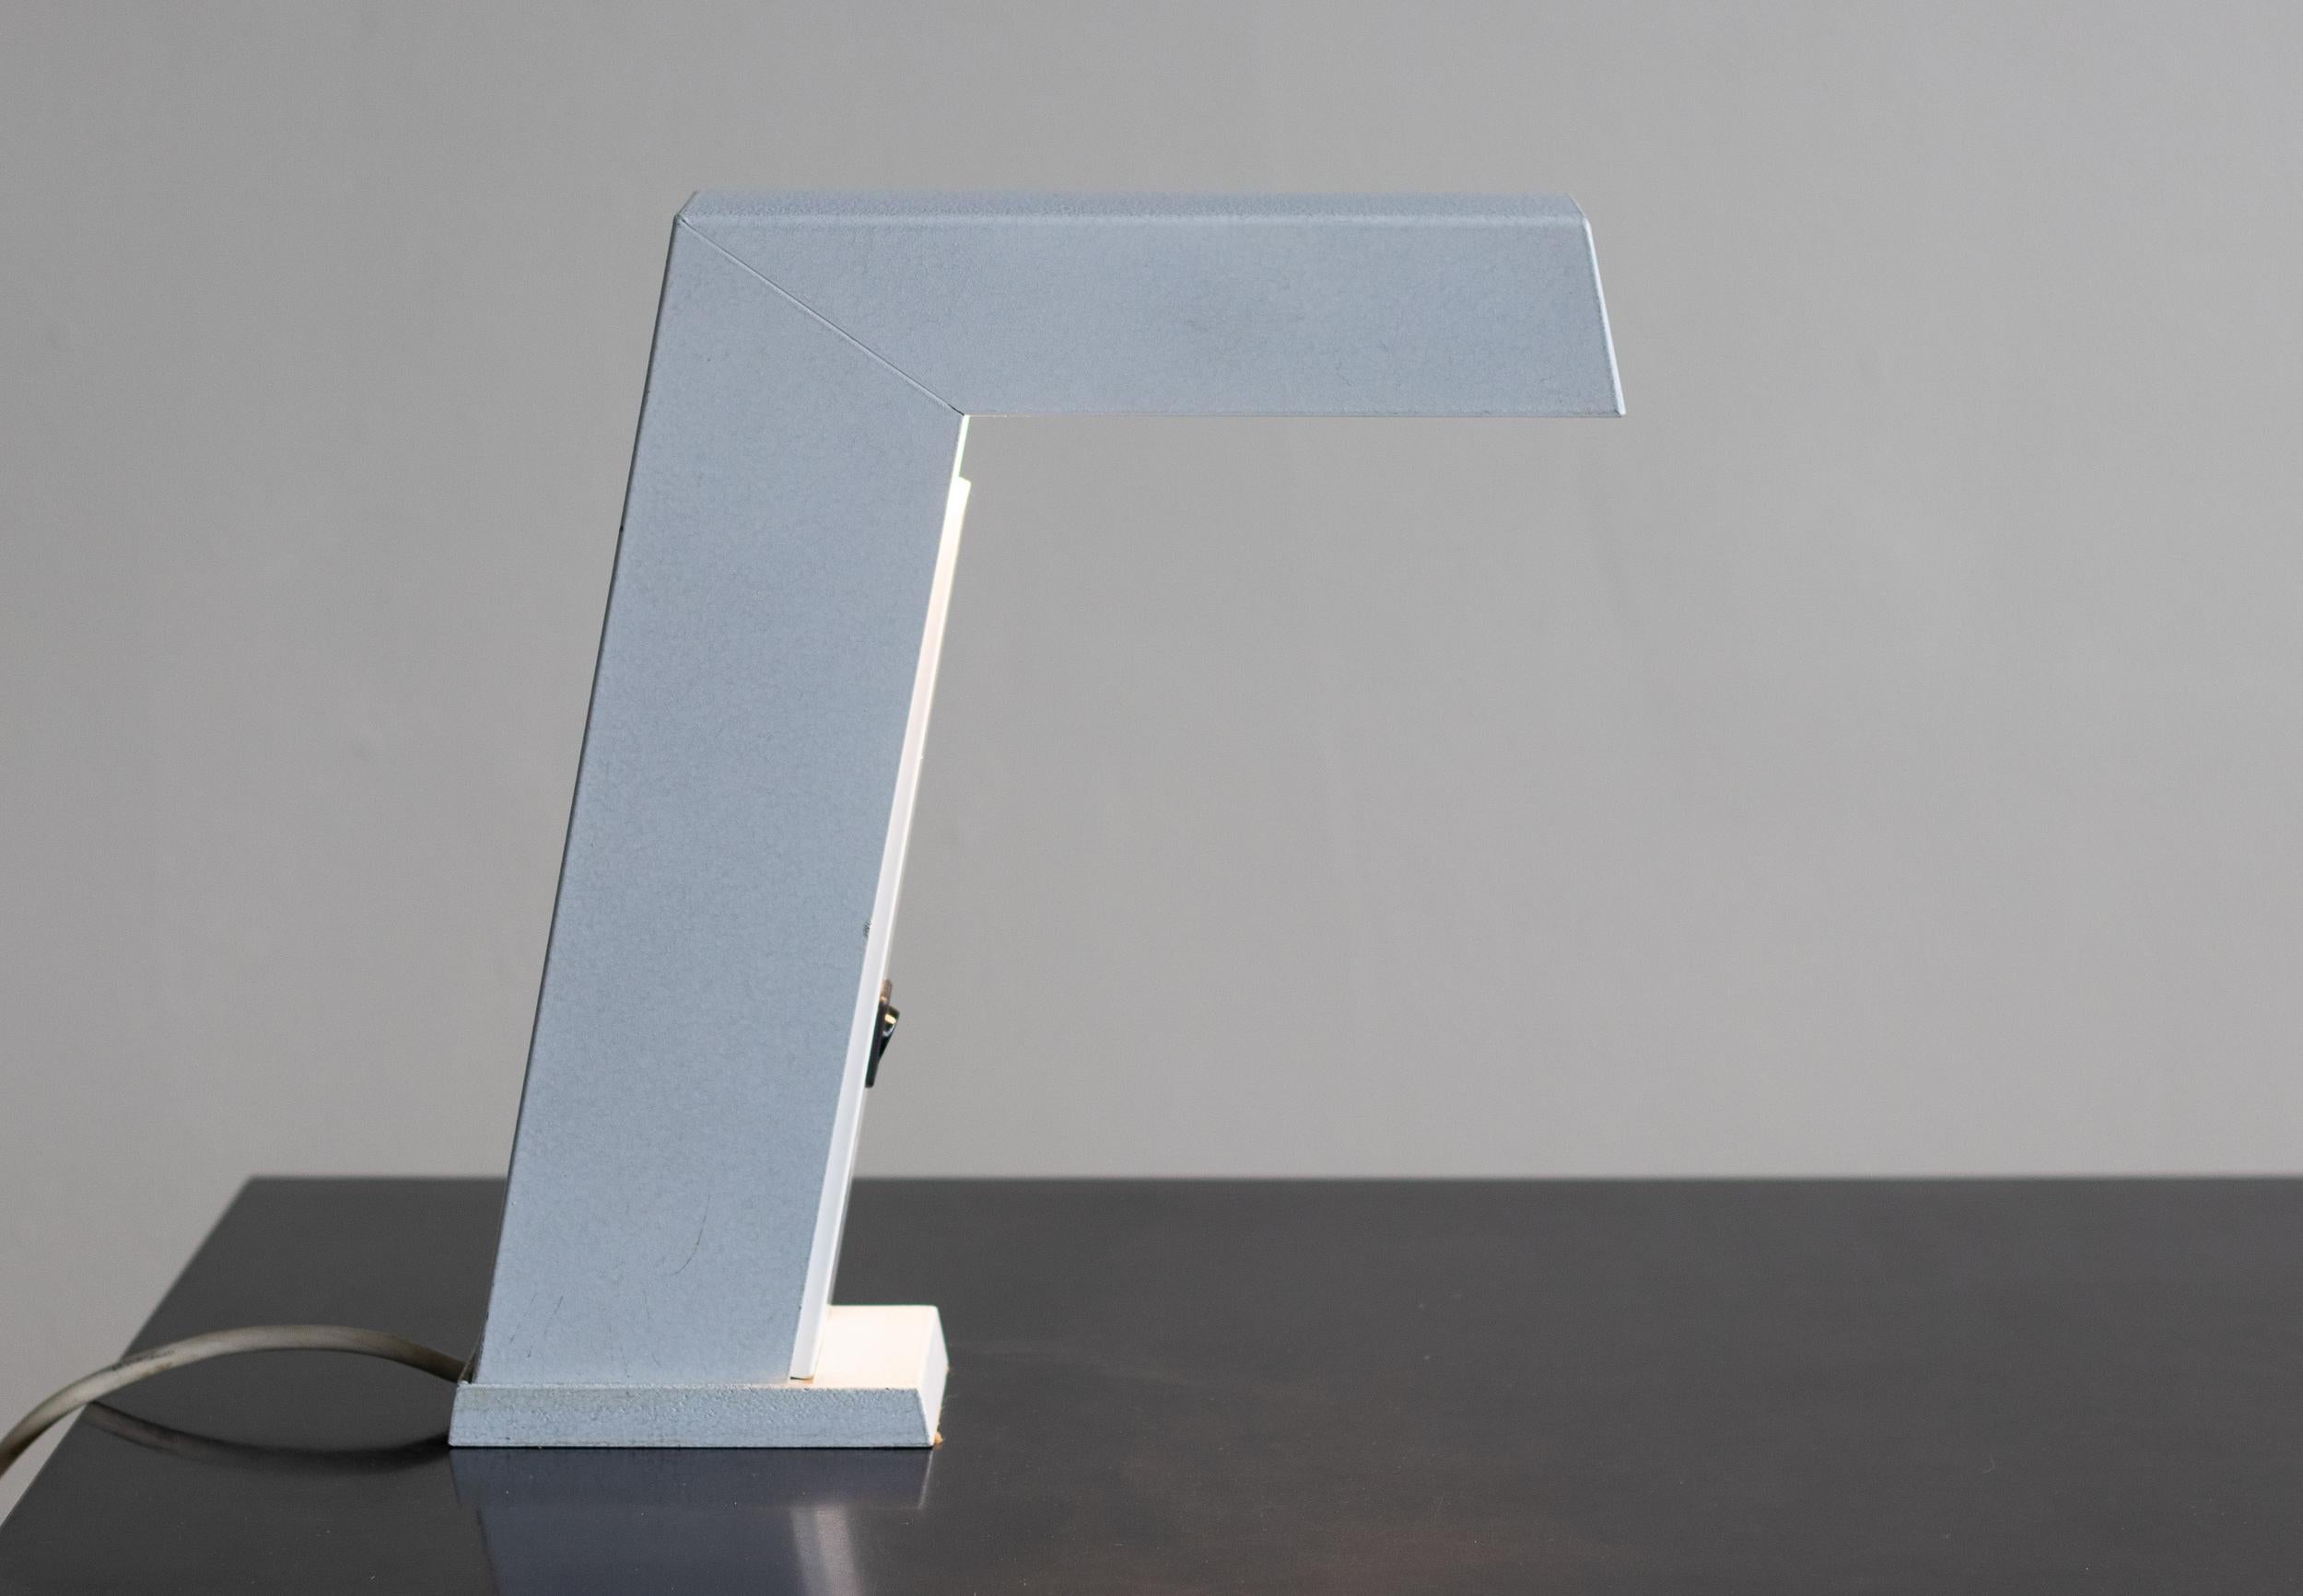 Minimalist halogen desk lamp 'Work Sun' made by Euro Licht.
Made in 1983, in fine vintage condition.

This great desk light would really compliment a Florence Knoll sideboard of the same period or a desk by Danish master Finn Juhl.